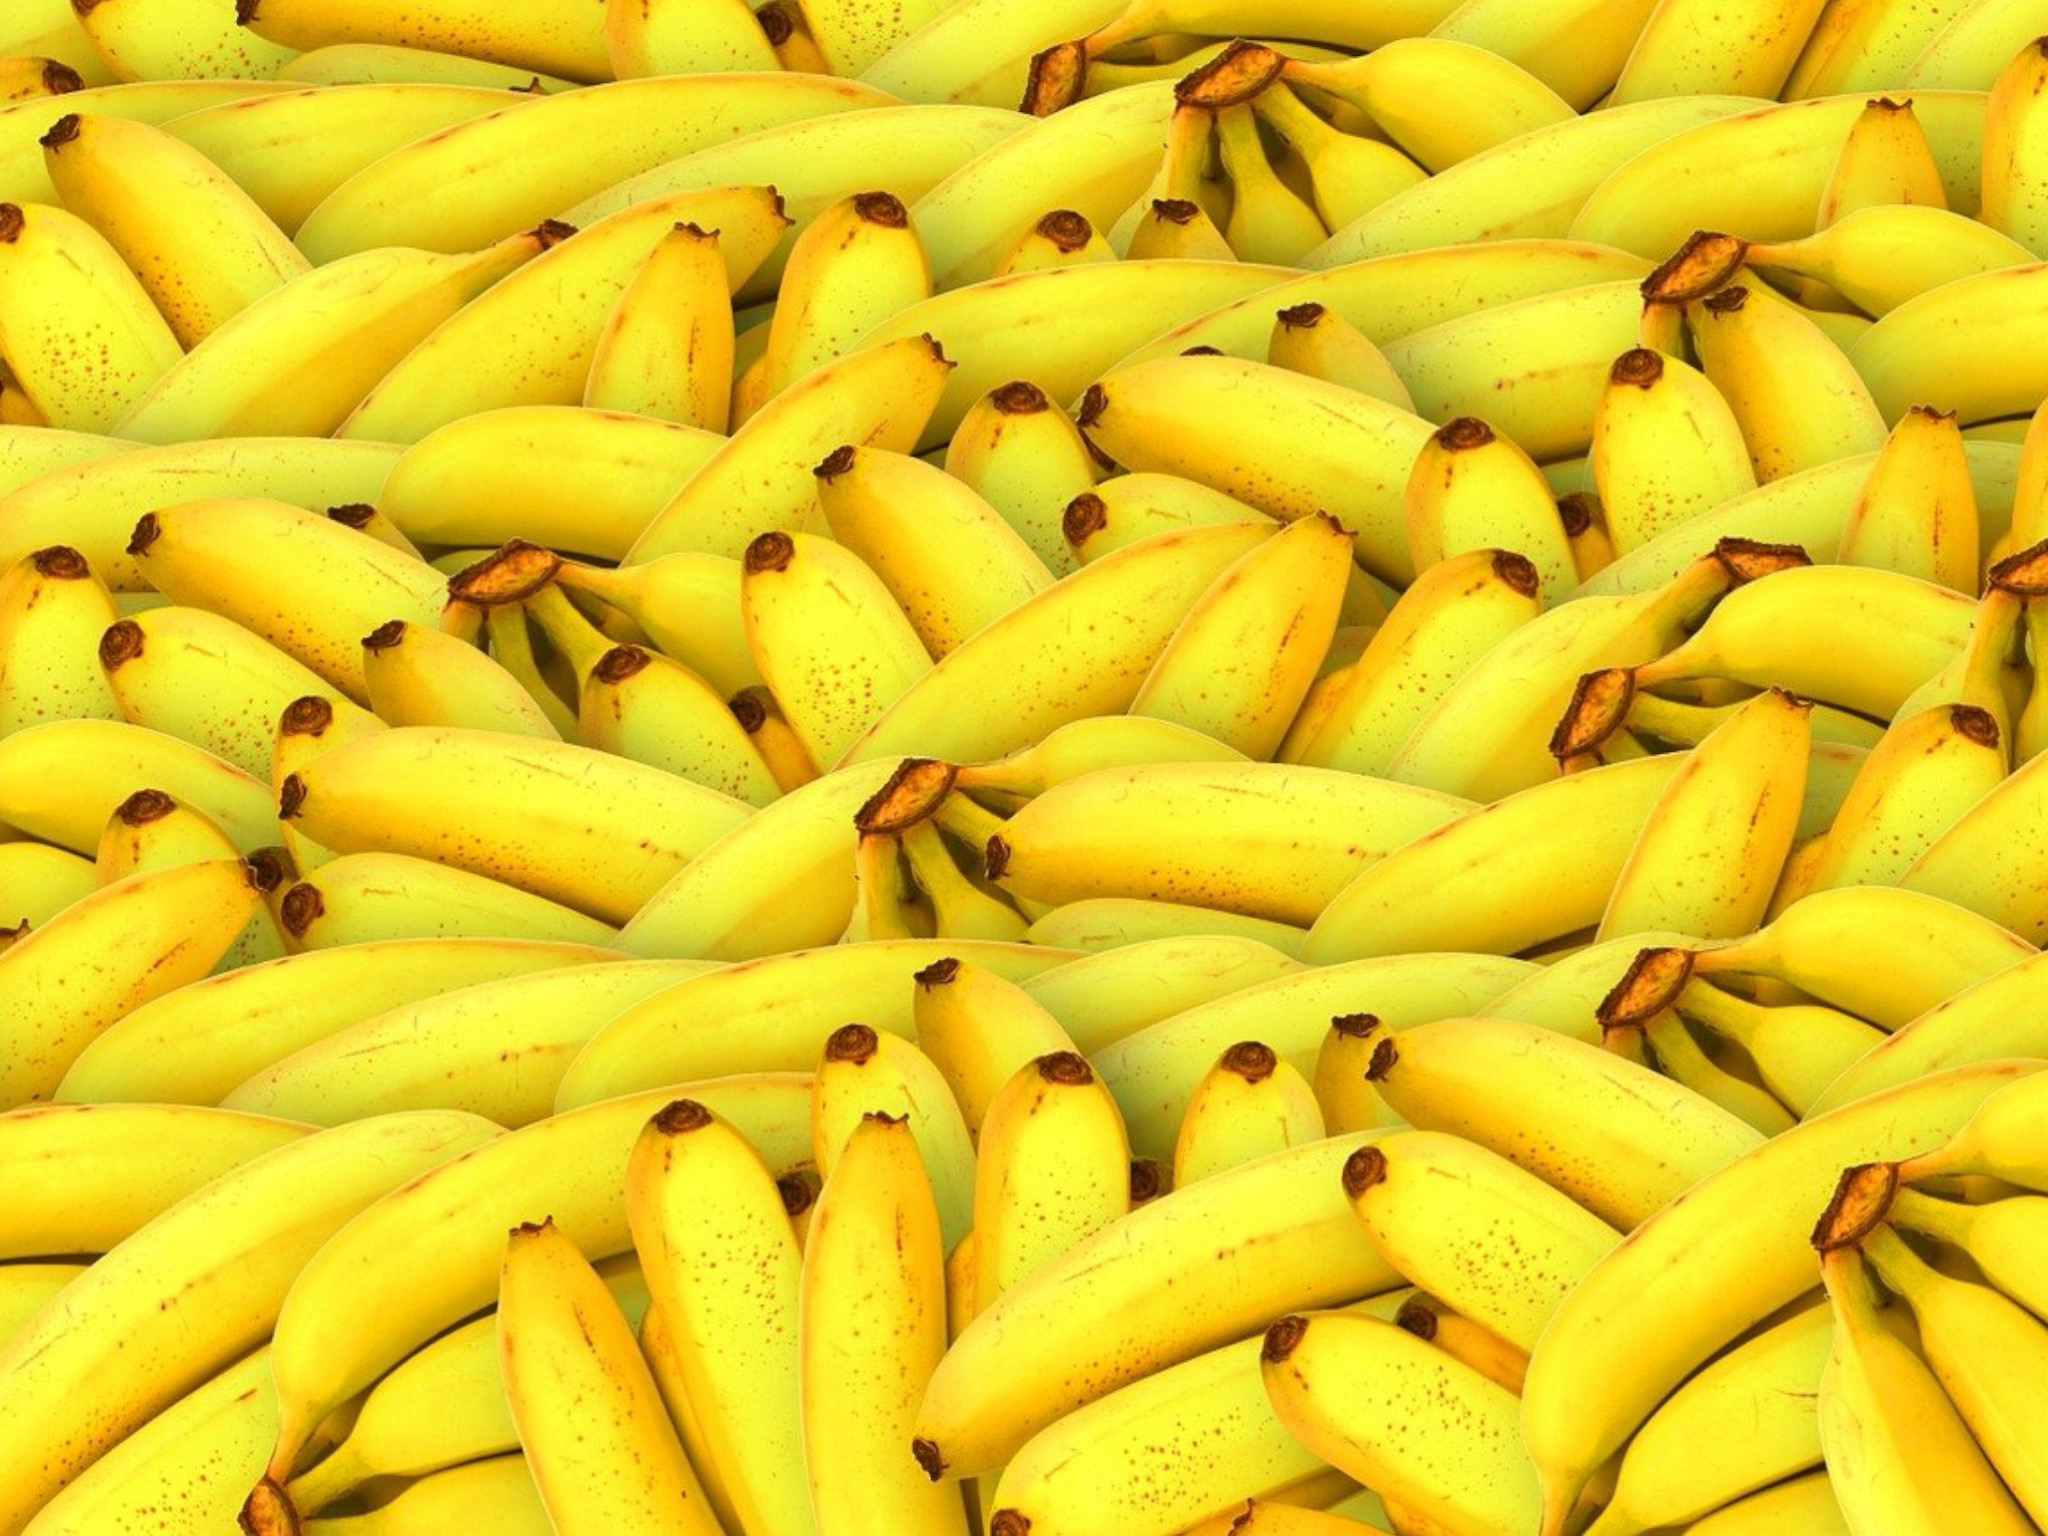 Bananas and any other foods are not effective mosquito repellents.